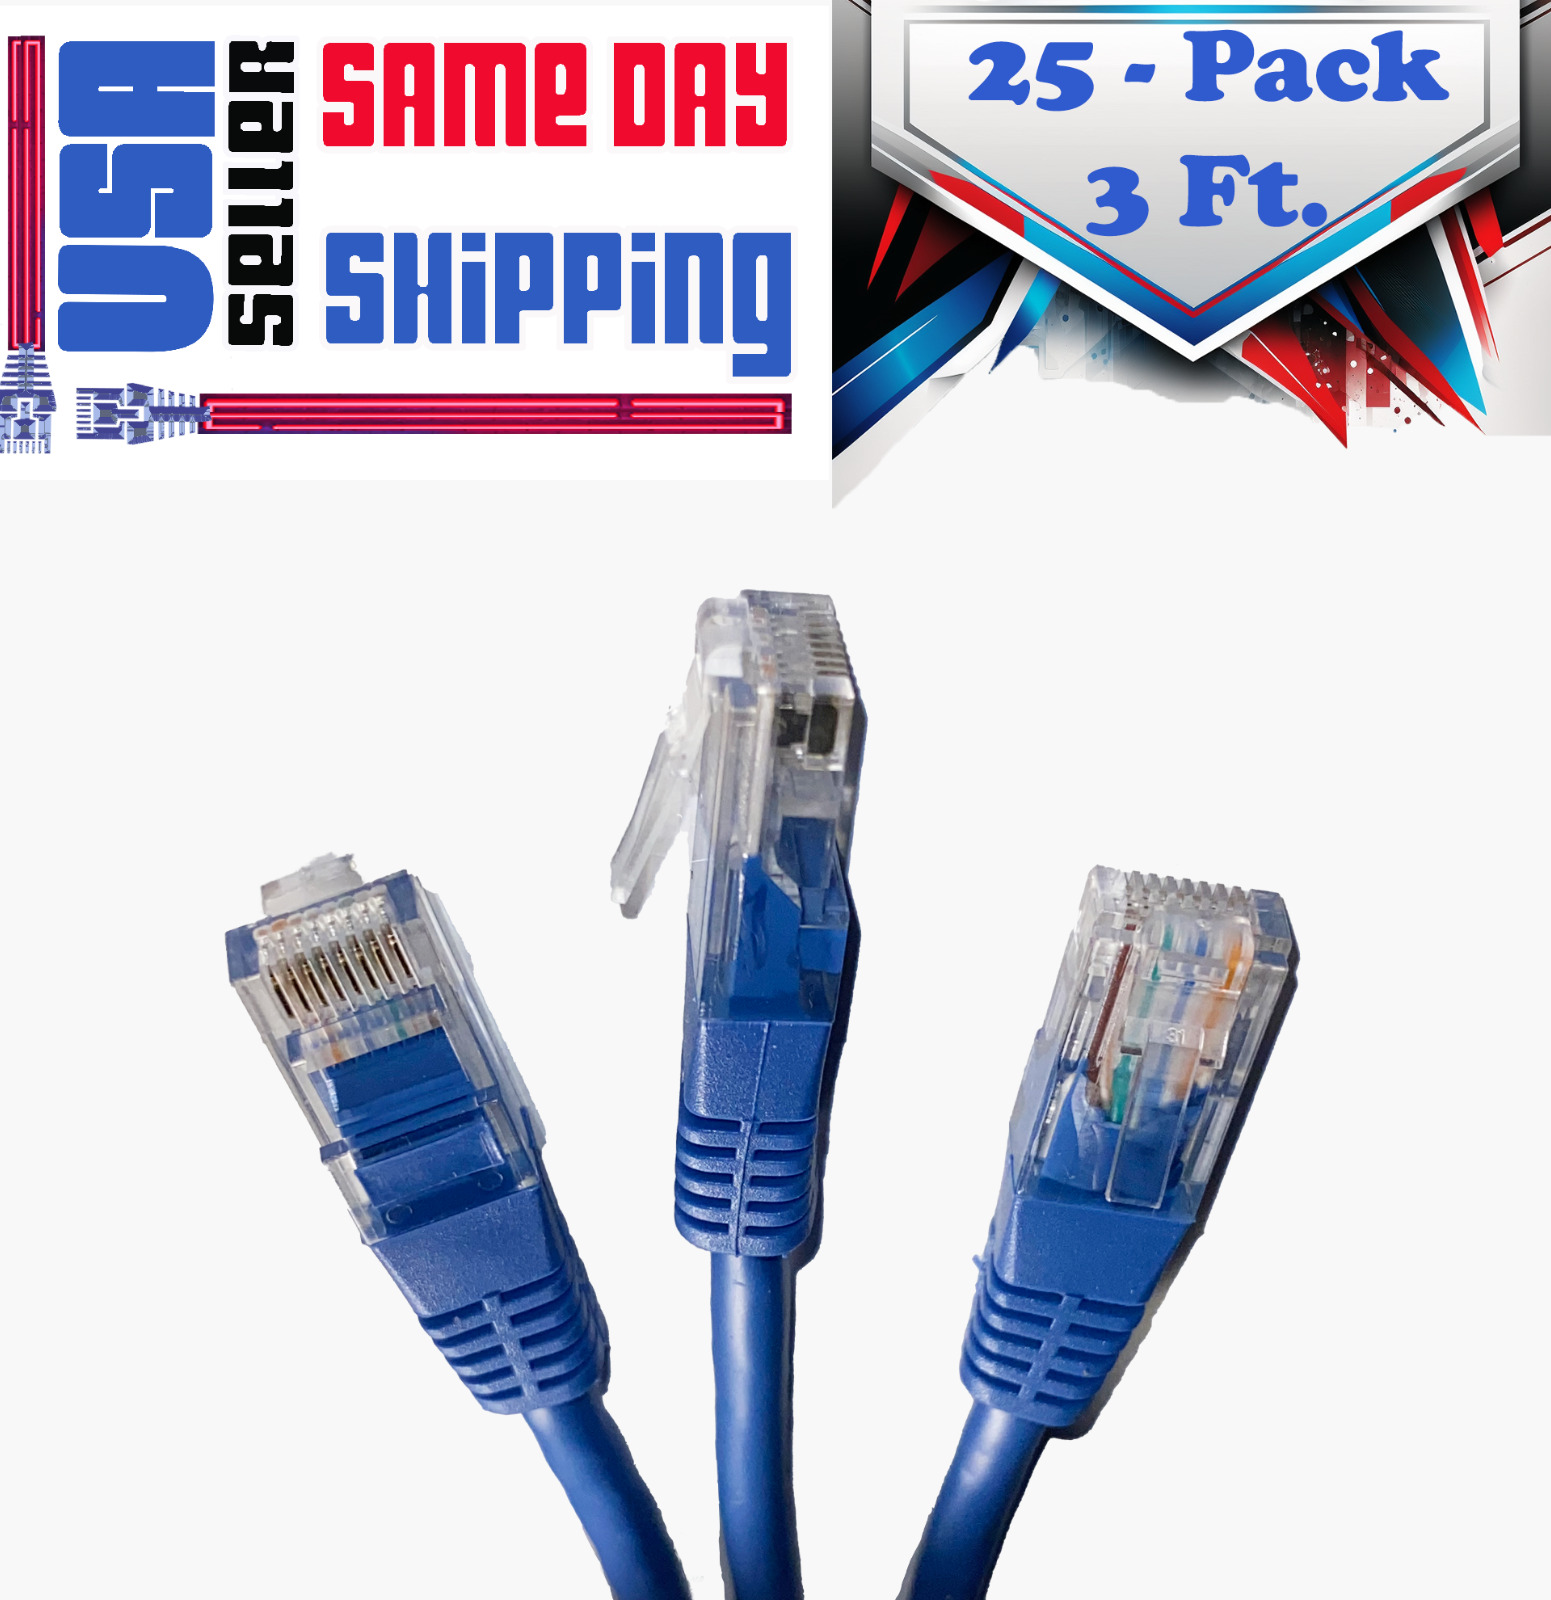 Cat6 Patch Cord 3\' Foot in Blue 25 Pcs Pack Ethernet Network Cable Tuff Jacks